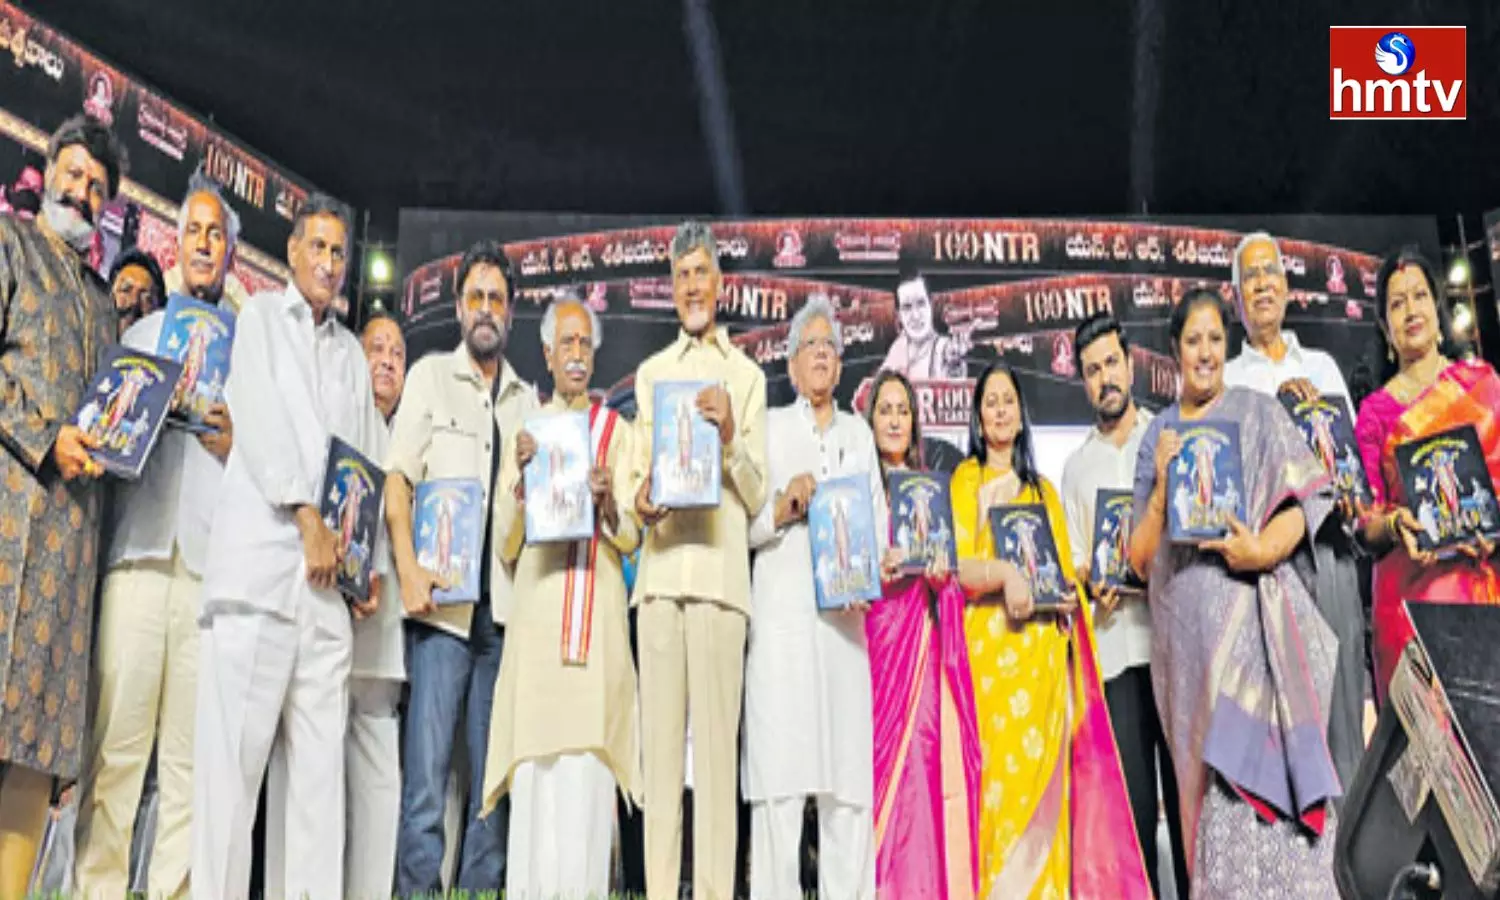 NTR 100 Years Celebrations In Hyderabad